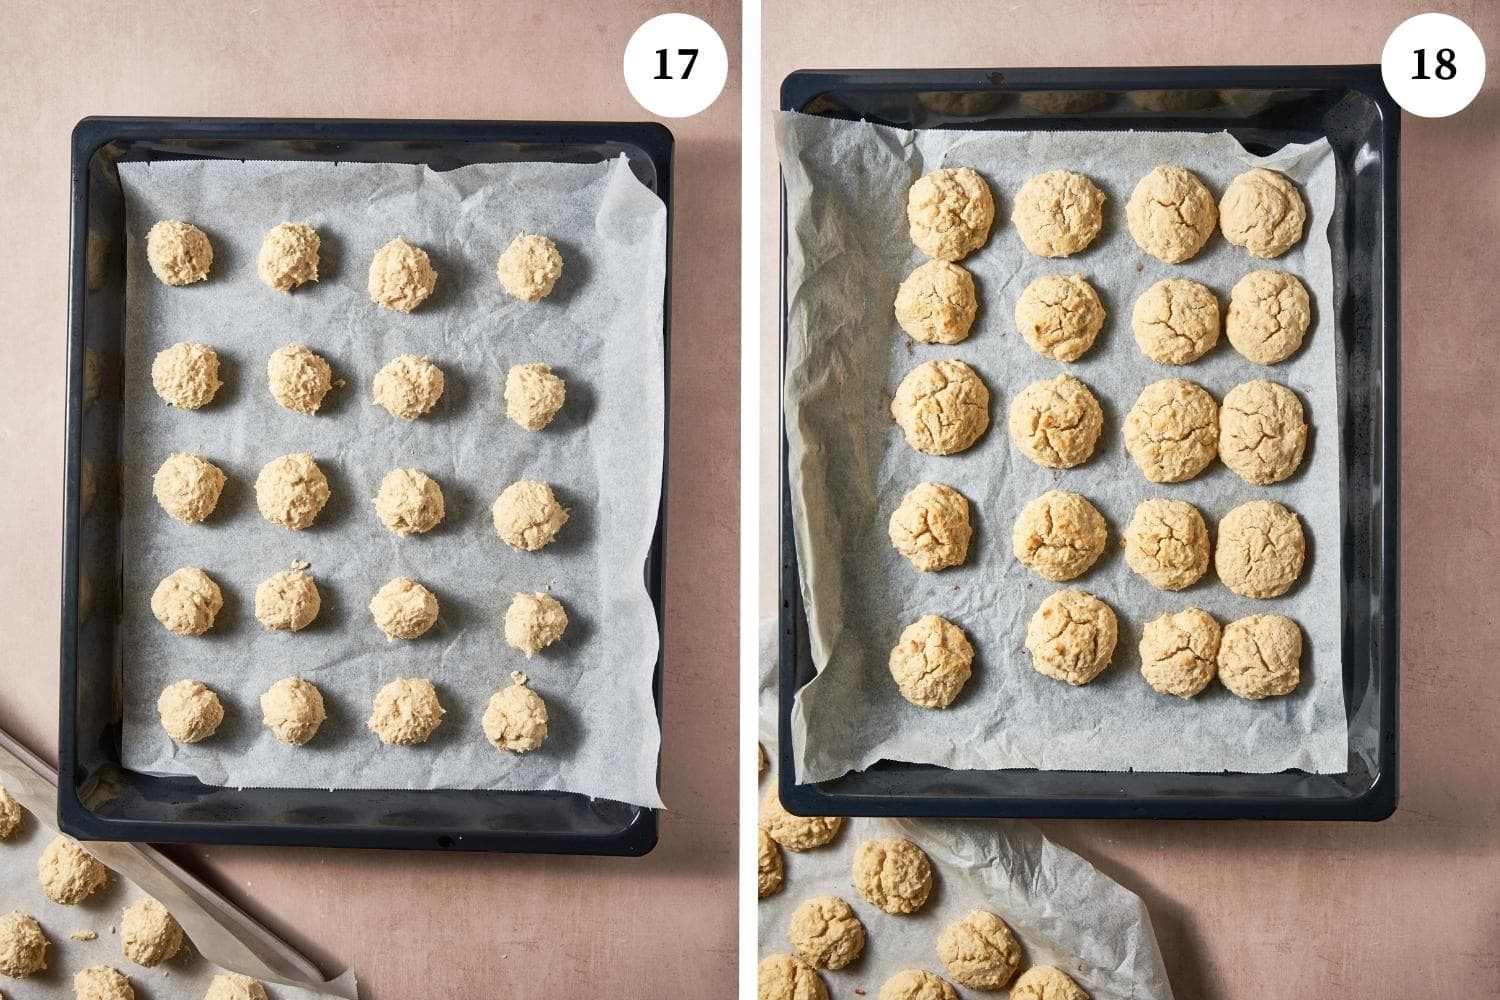 Ricotta cookies procedure: the dough is being shaped into balls. 